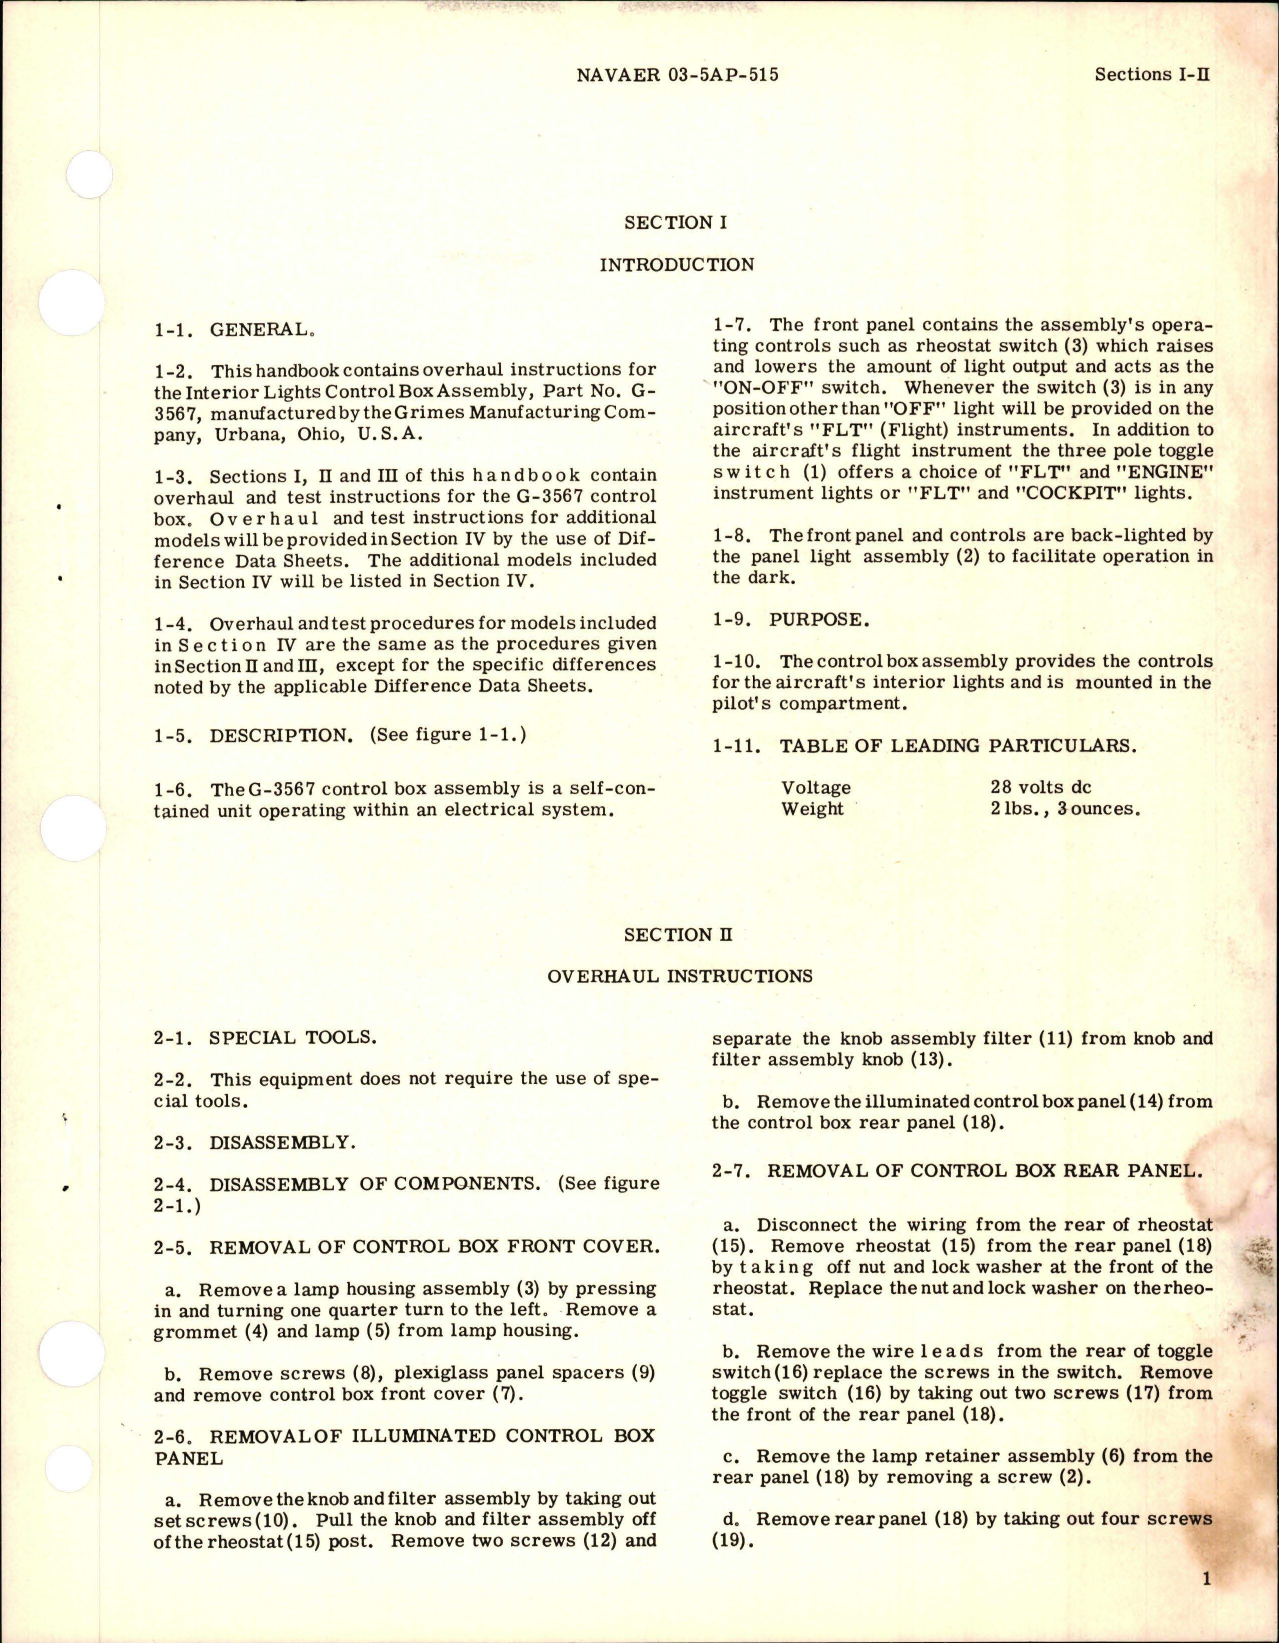 Sample page 5 from AirCorps Library document: Overhaul Instructions for Interior Lights Control Box - Part G-3567 